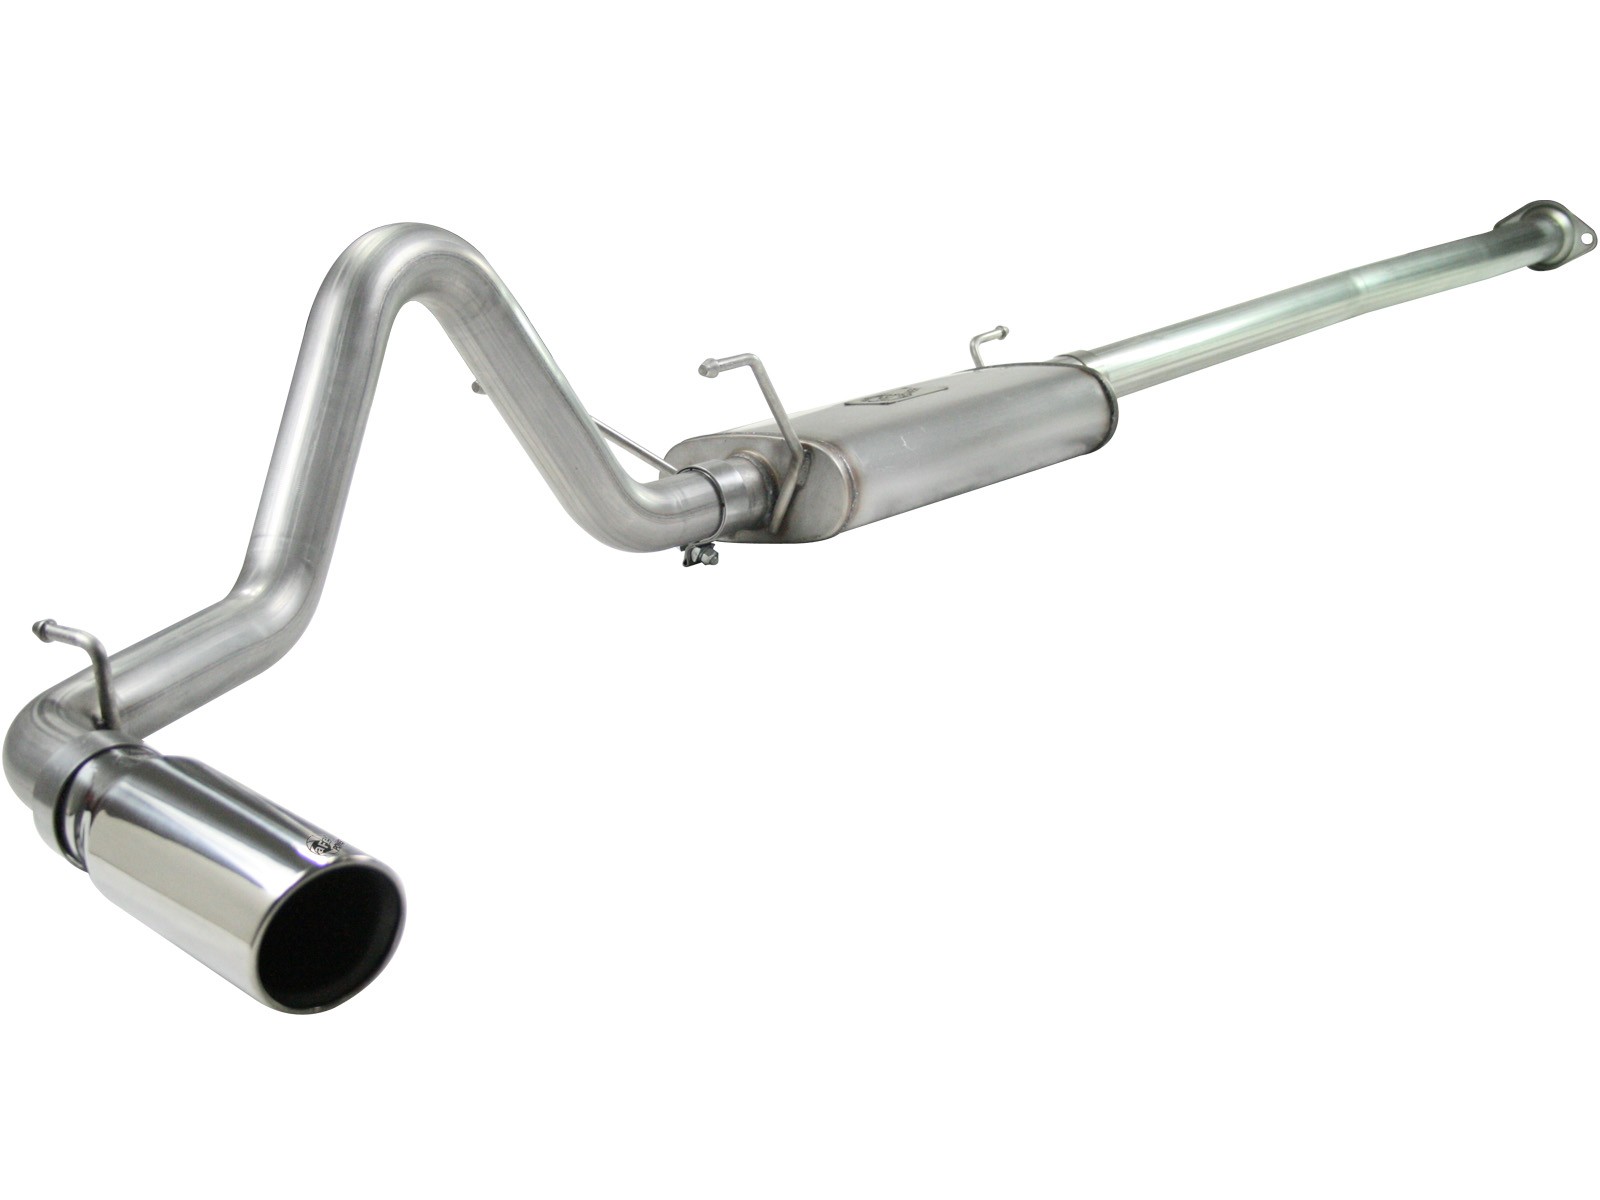 2008 Toyota Tundra Exhaust System Download